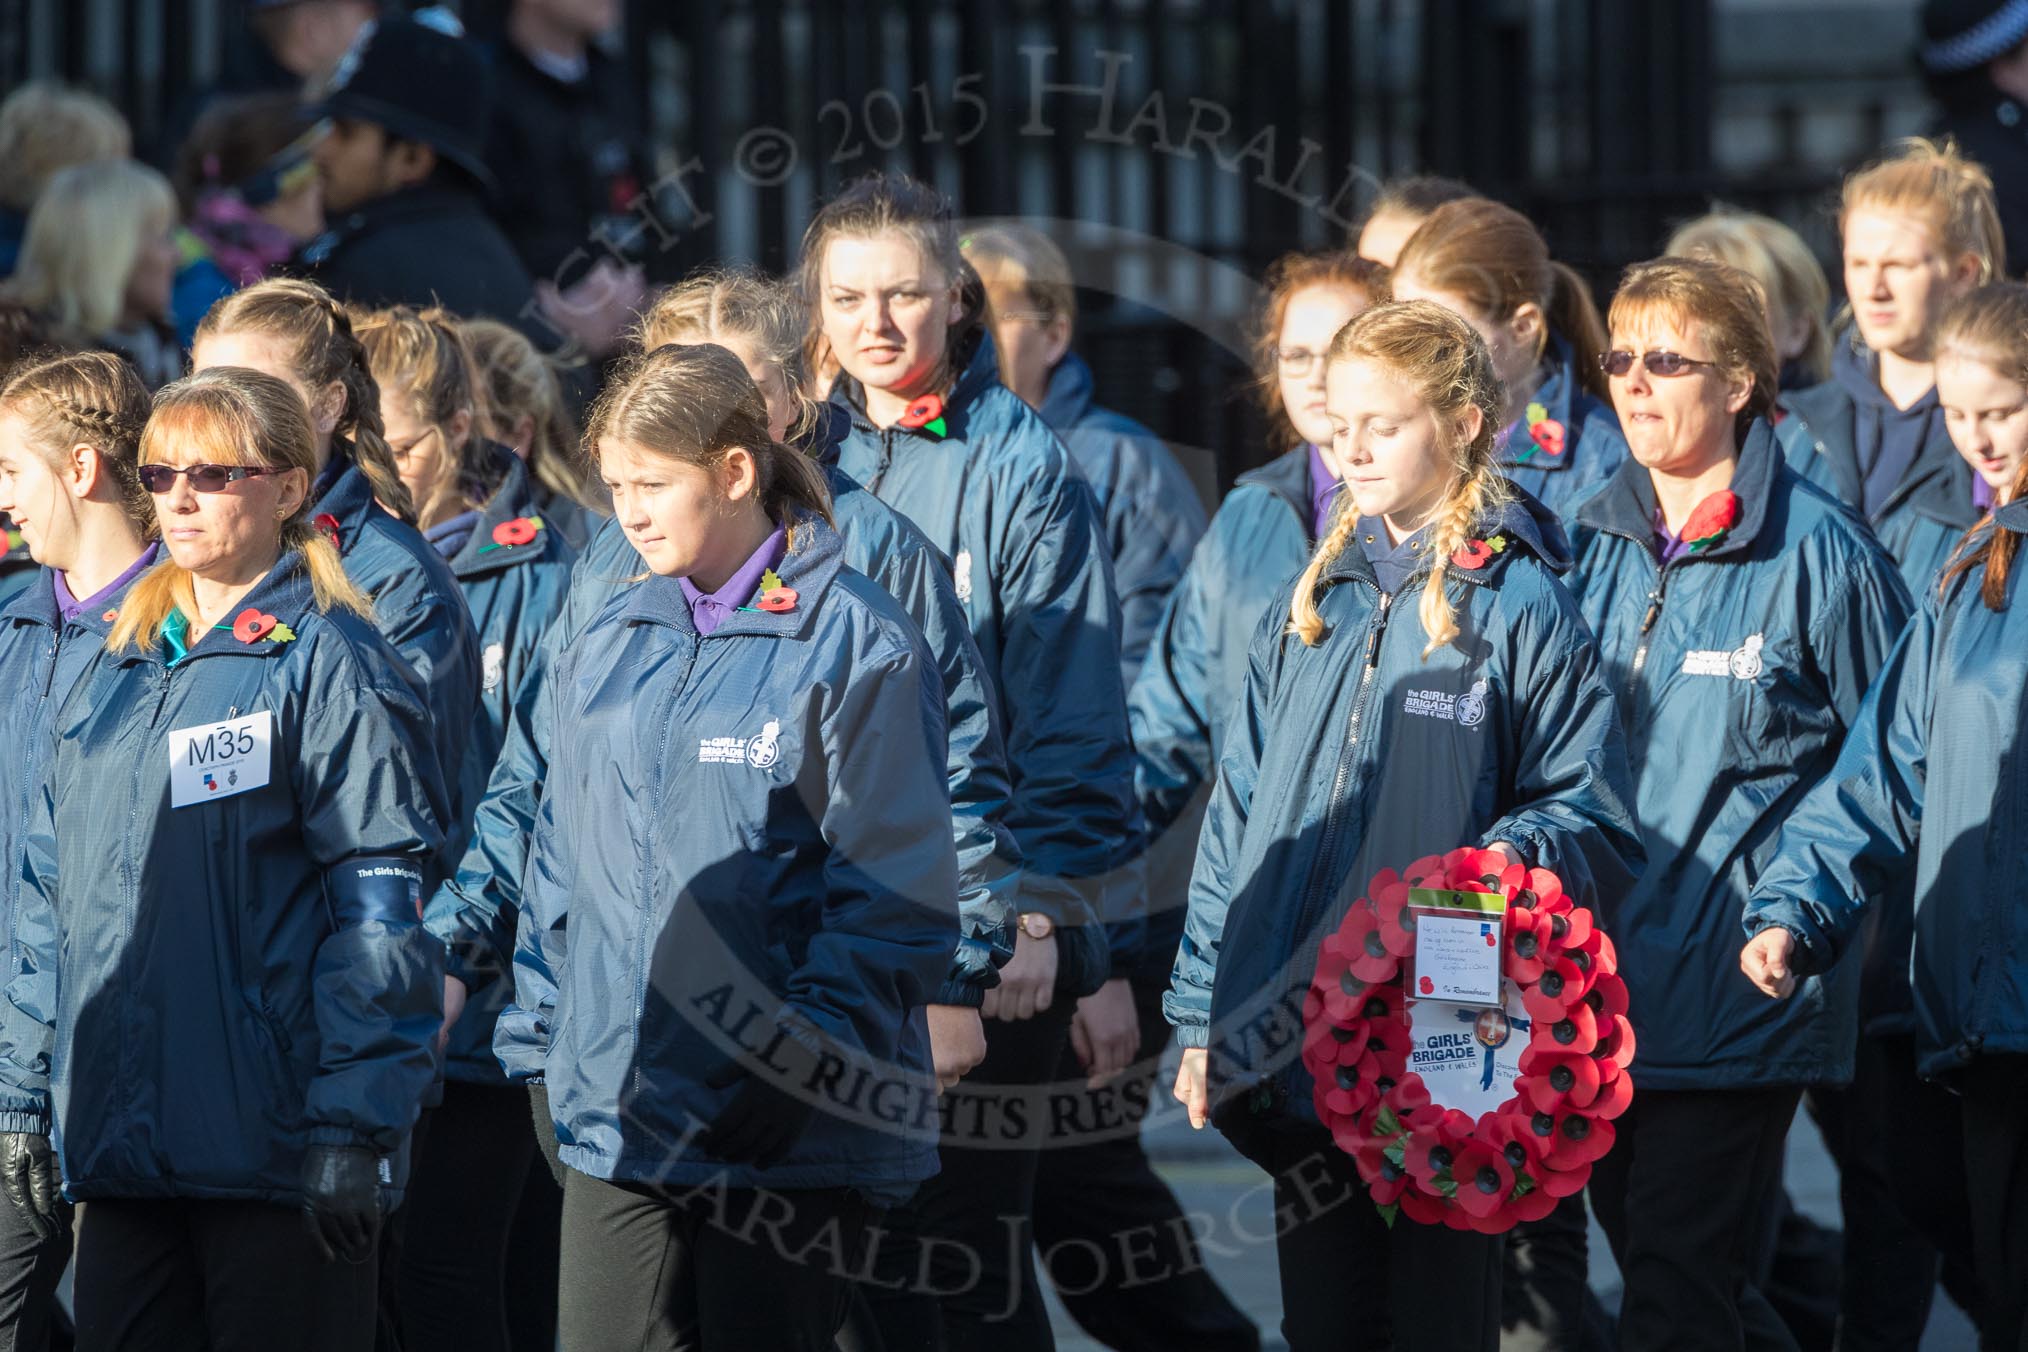 March Past, Remembrance Sunday at the Cenotaph 2016: M35 Girls Brigade England & Wales.
Cenotaph, Whitehall, London SW1,
London,
Greater London,
United Kingdom,
on 13 November 2016 at 13:18, image #2870